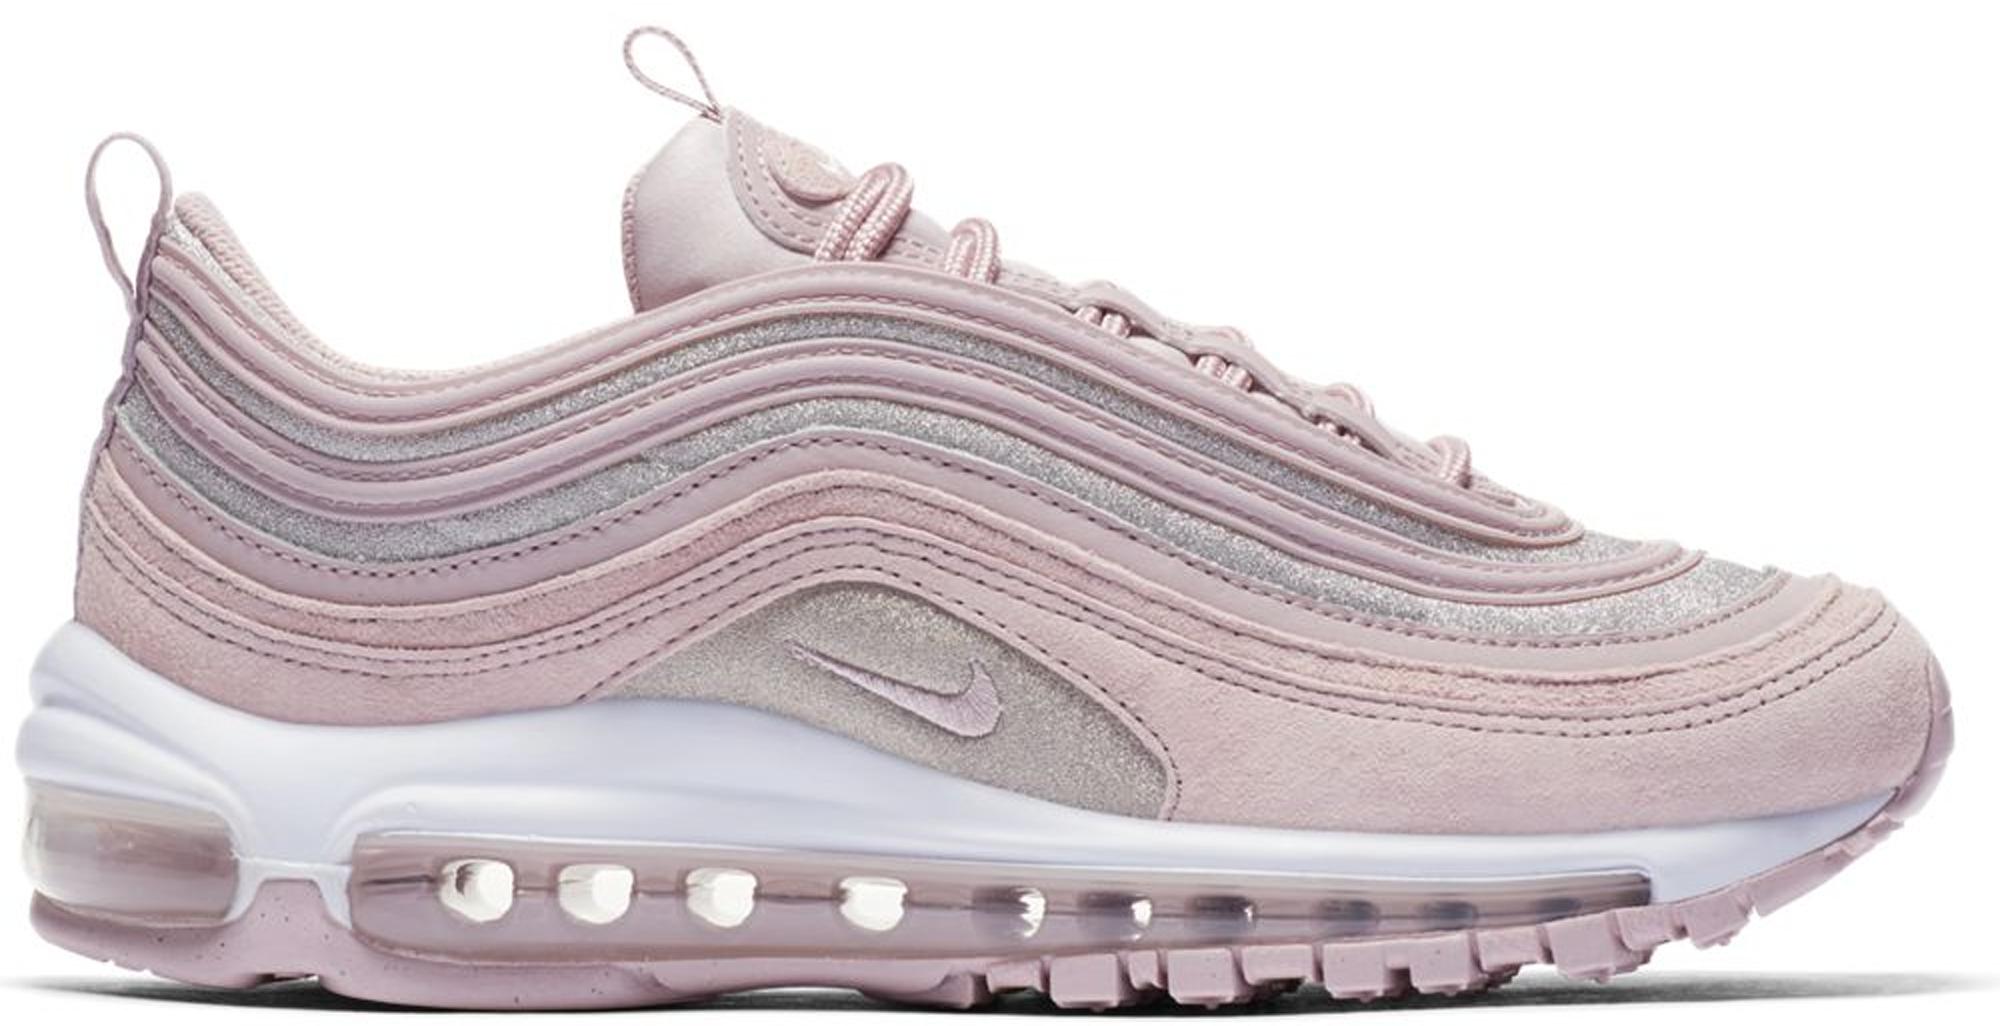 Nike Air Max 97 Particle Rose (w) in 